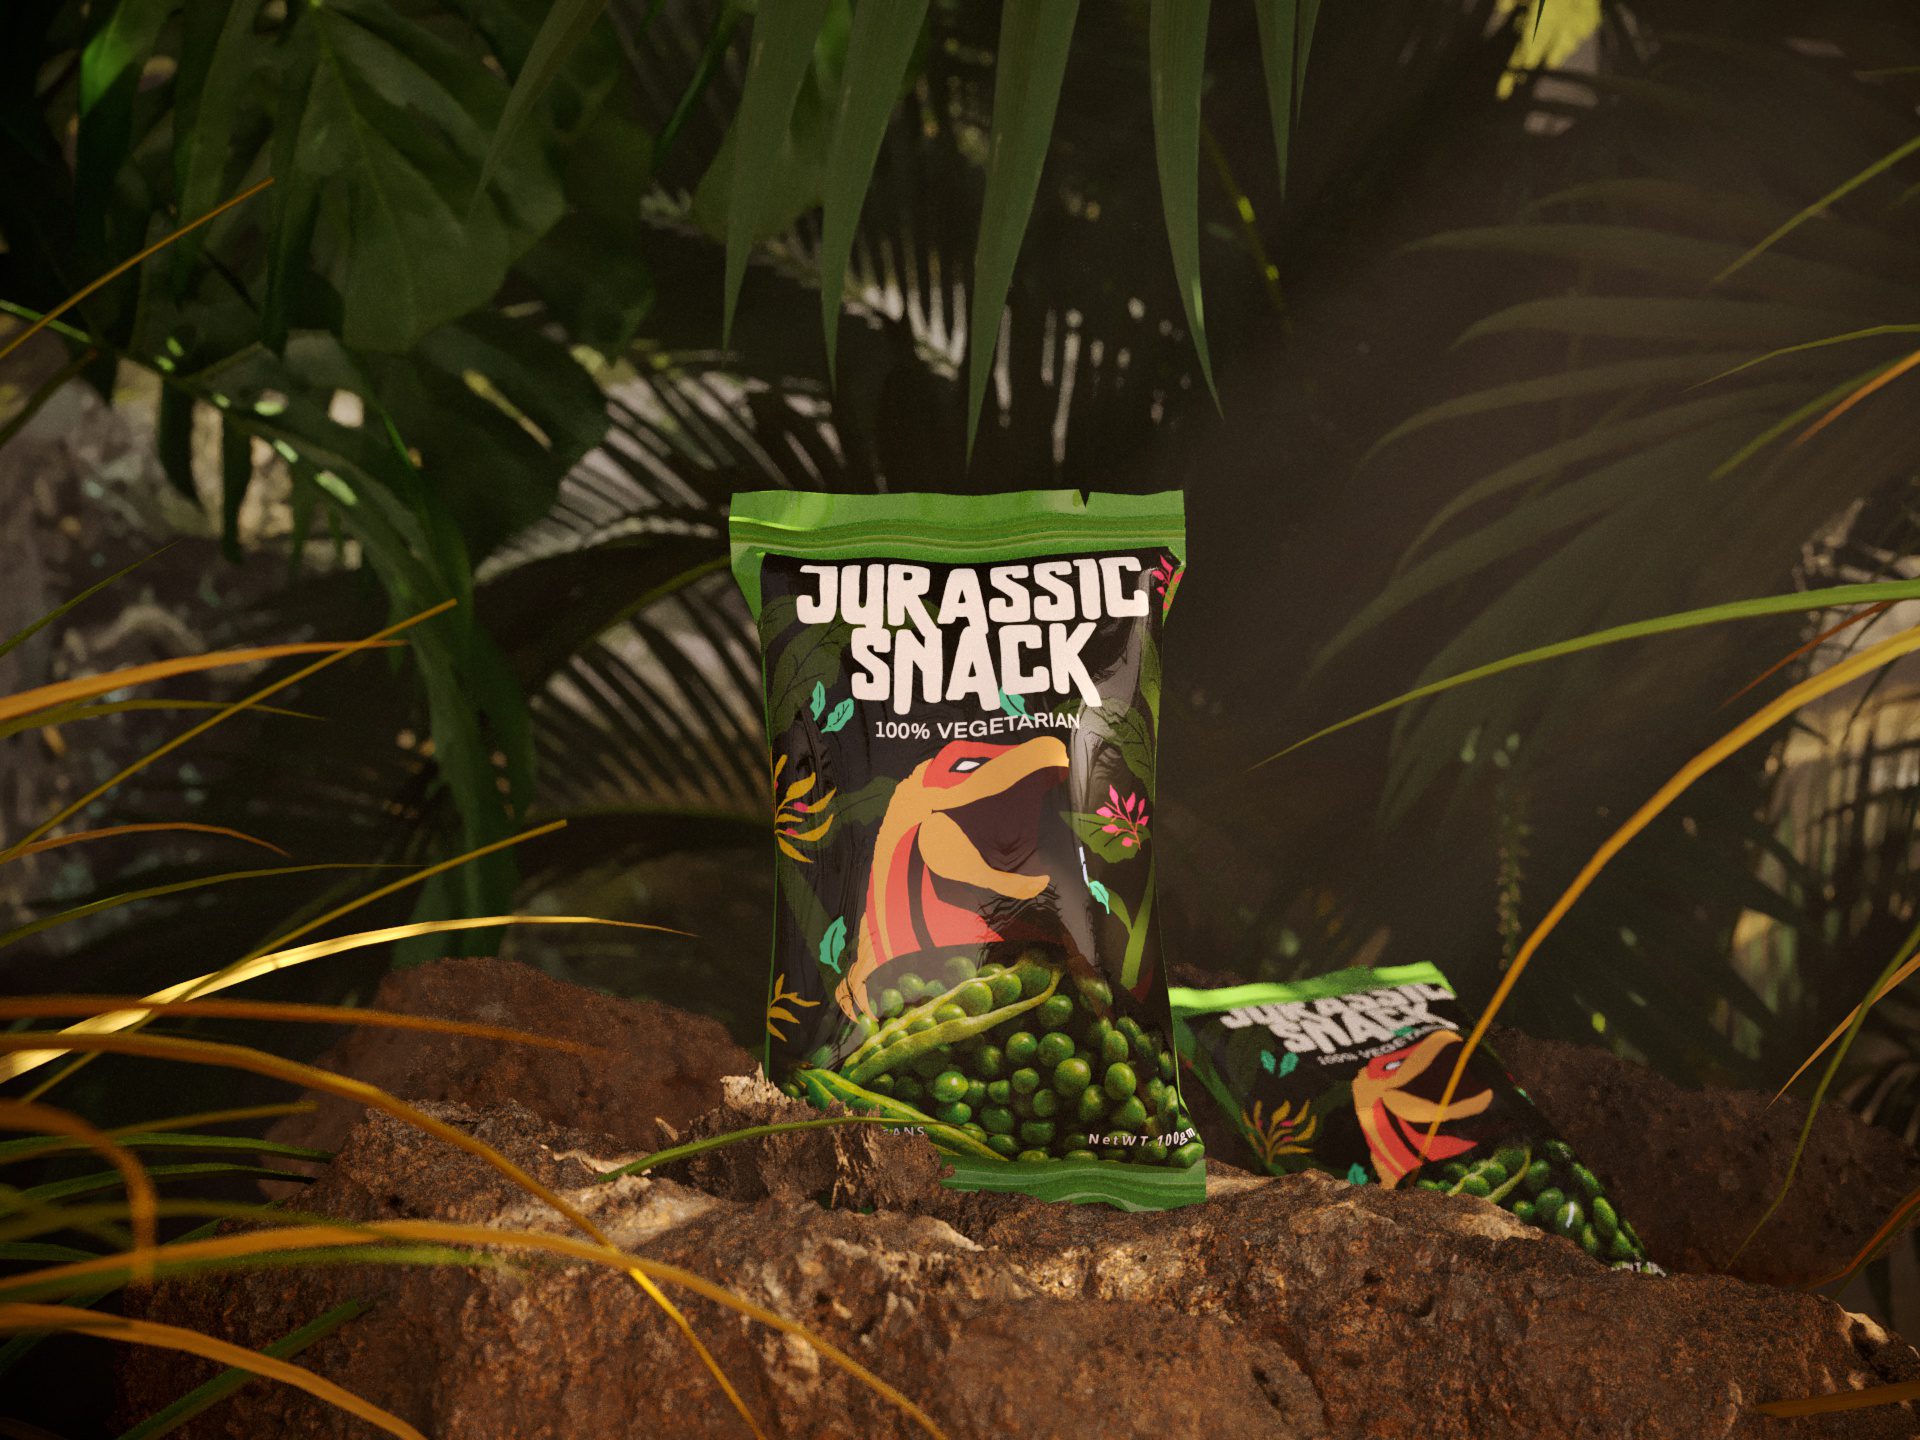 This image depicts a snack product called "Jurassic Snack," with the tagline "100% Vegetarian." The snack is packaged in a vibrant, colorful bag that prominently features illustrations of greenery and a dinosaur. The setting of the image is a lush, jungle-like environment, which complements the product's branding and name, suggesting a prehistoric theme. The snacks themselves appear to be small, green, and pea-like, as shown on the front of the package. The overall design and imagery convey a natural, plant-based product, aligning with the vegetarian claim.